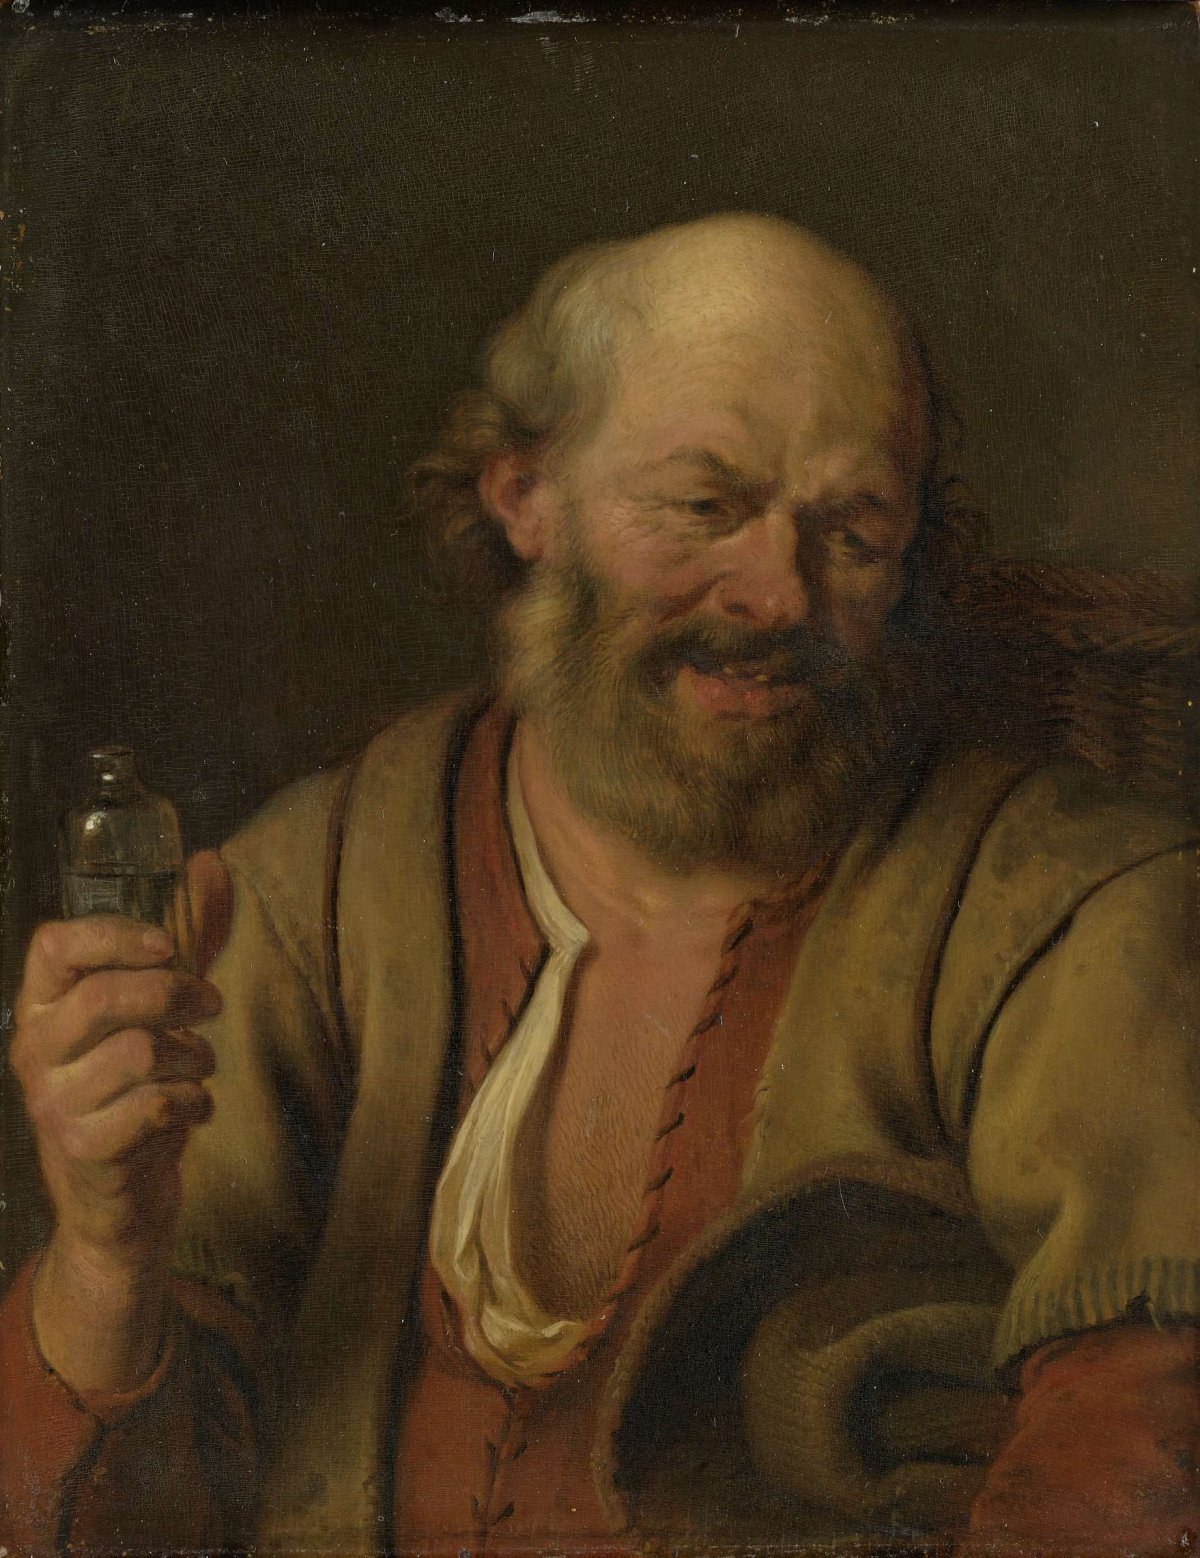 A Man with a Gin Bottle, Ary de Vois, 1660 - 1680